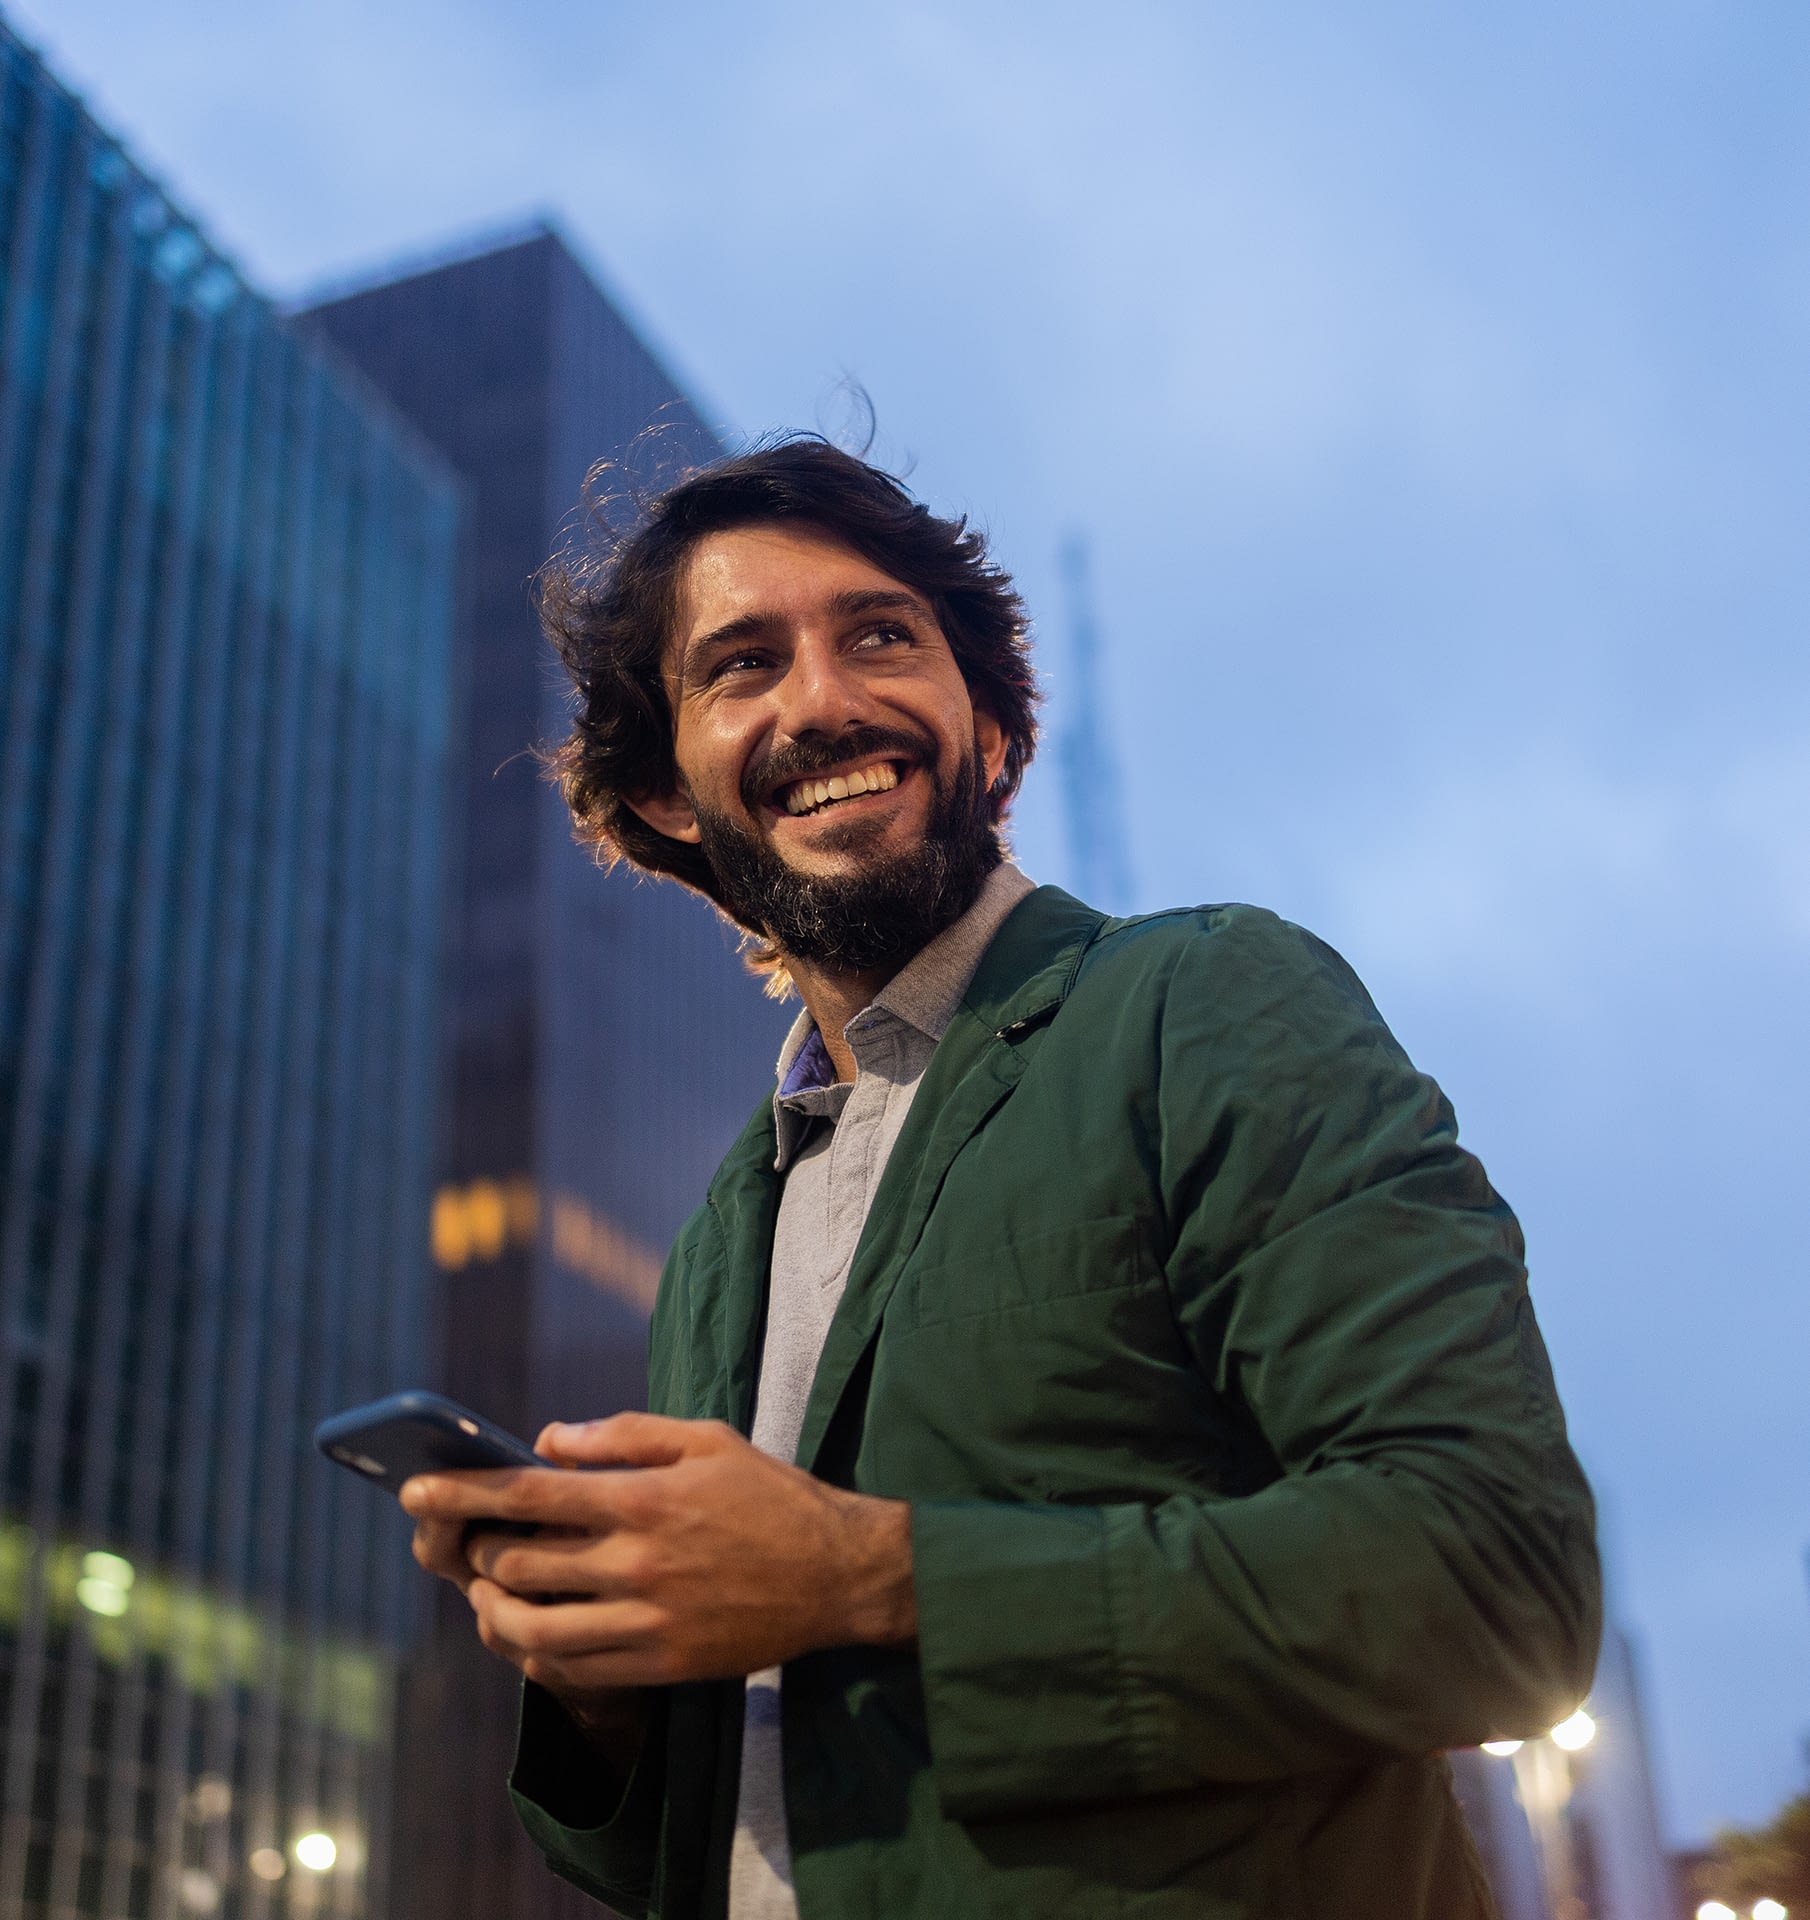 View-of-young-man-using-a-smartphone-at-night-time-with-city-view-landscape-in-the-background